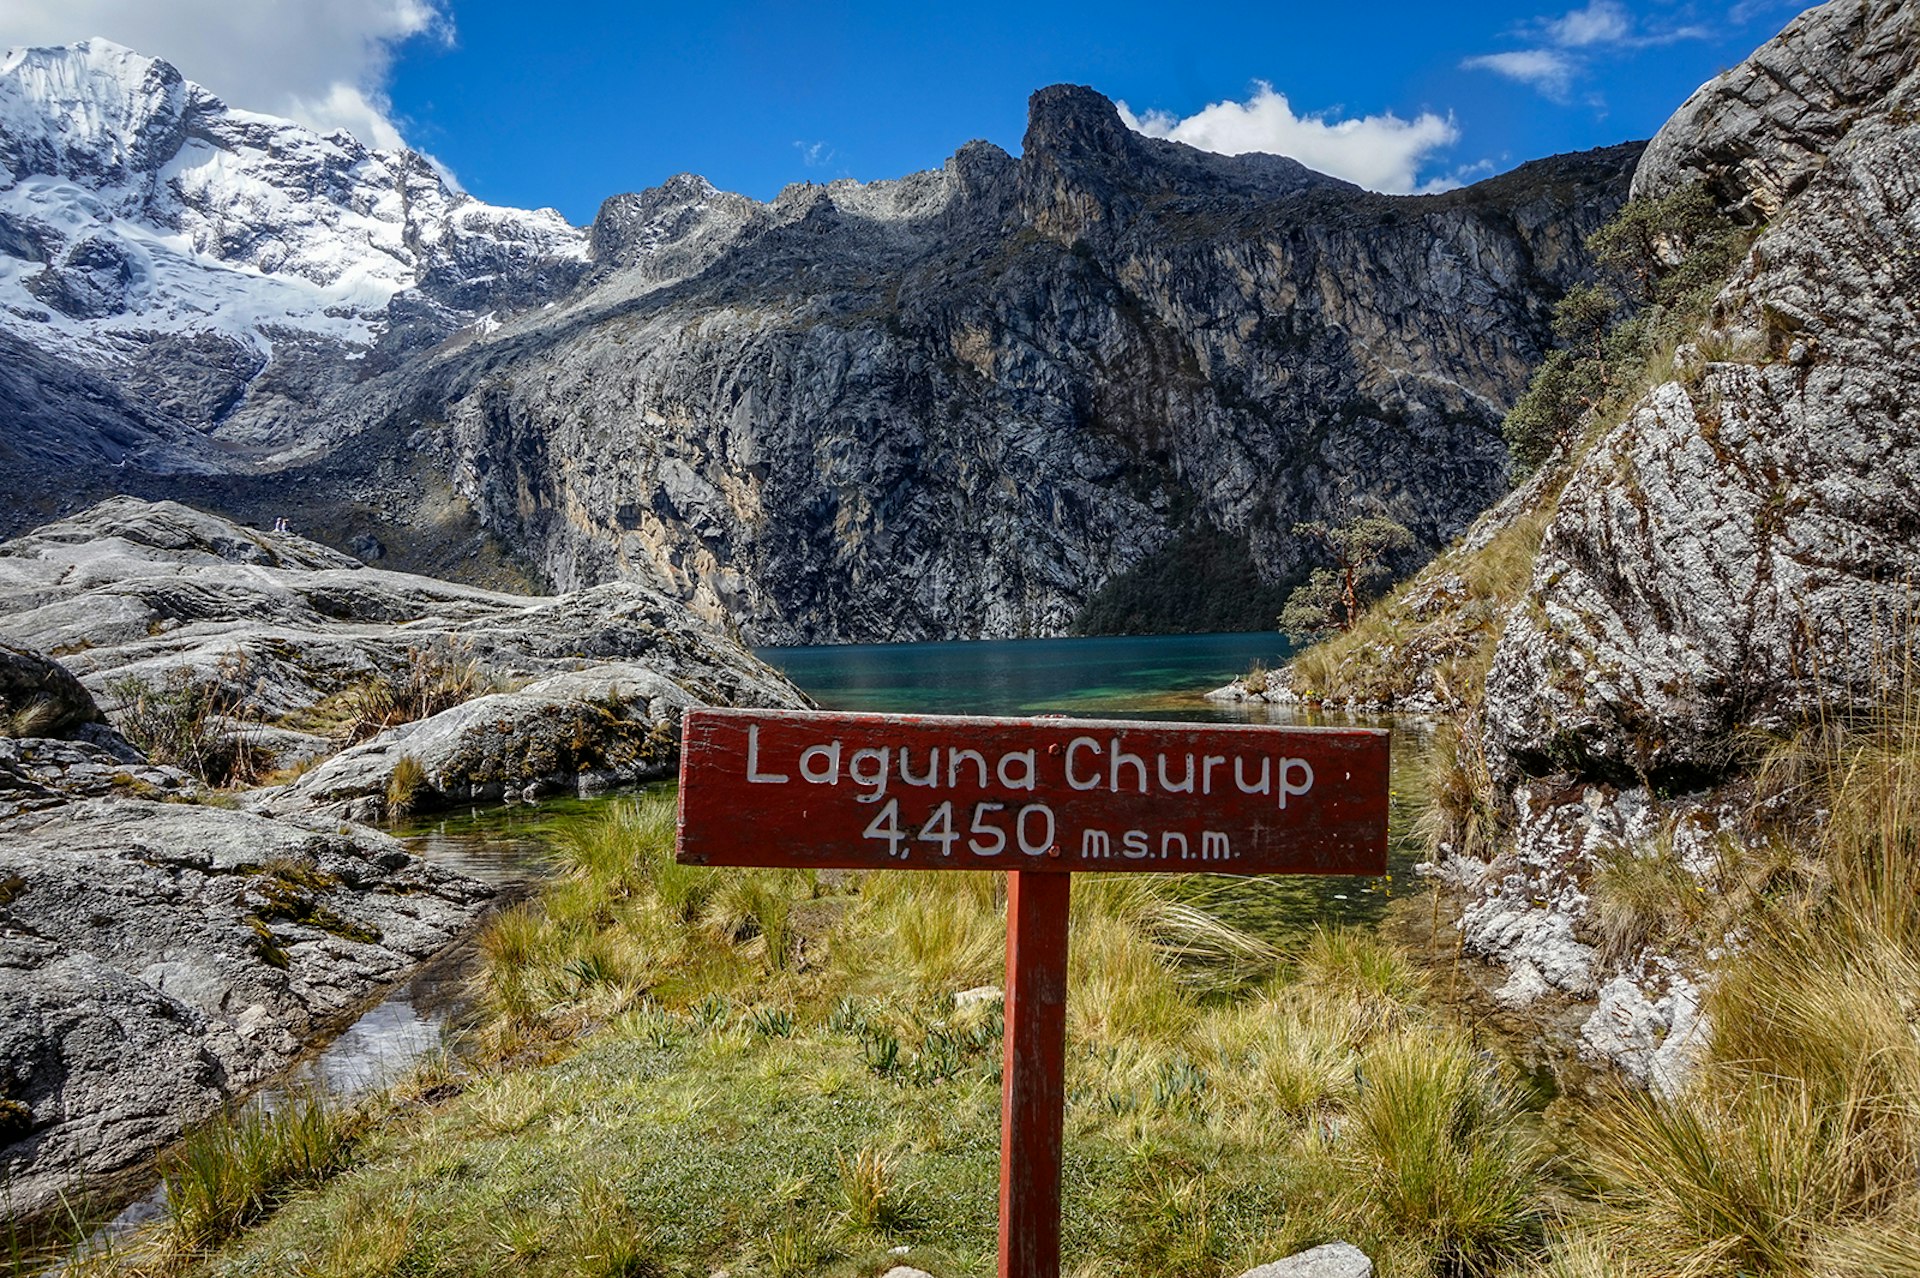 A clear mountain lake surrounded by rocky, snowy peaks, with an altitude sign for Laguna Churup in the foreground © Brendan Sainsbury / Lonely Planet